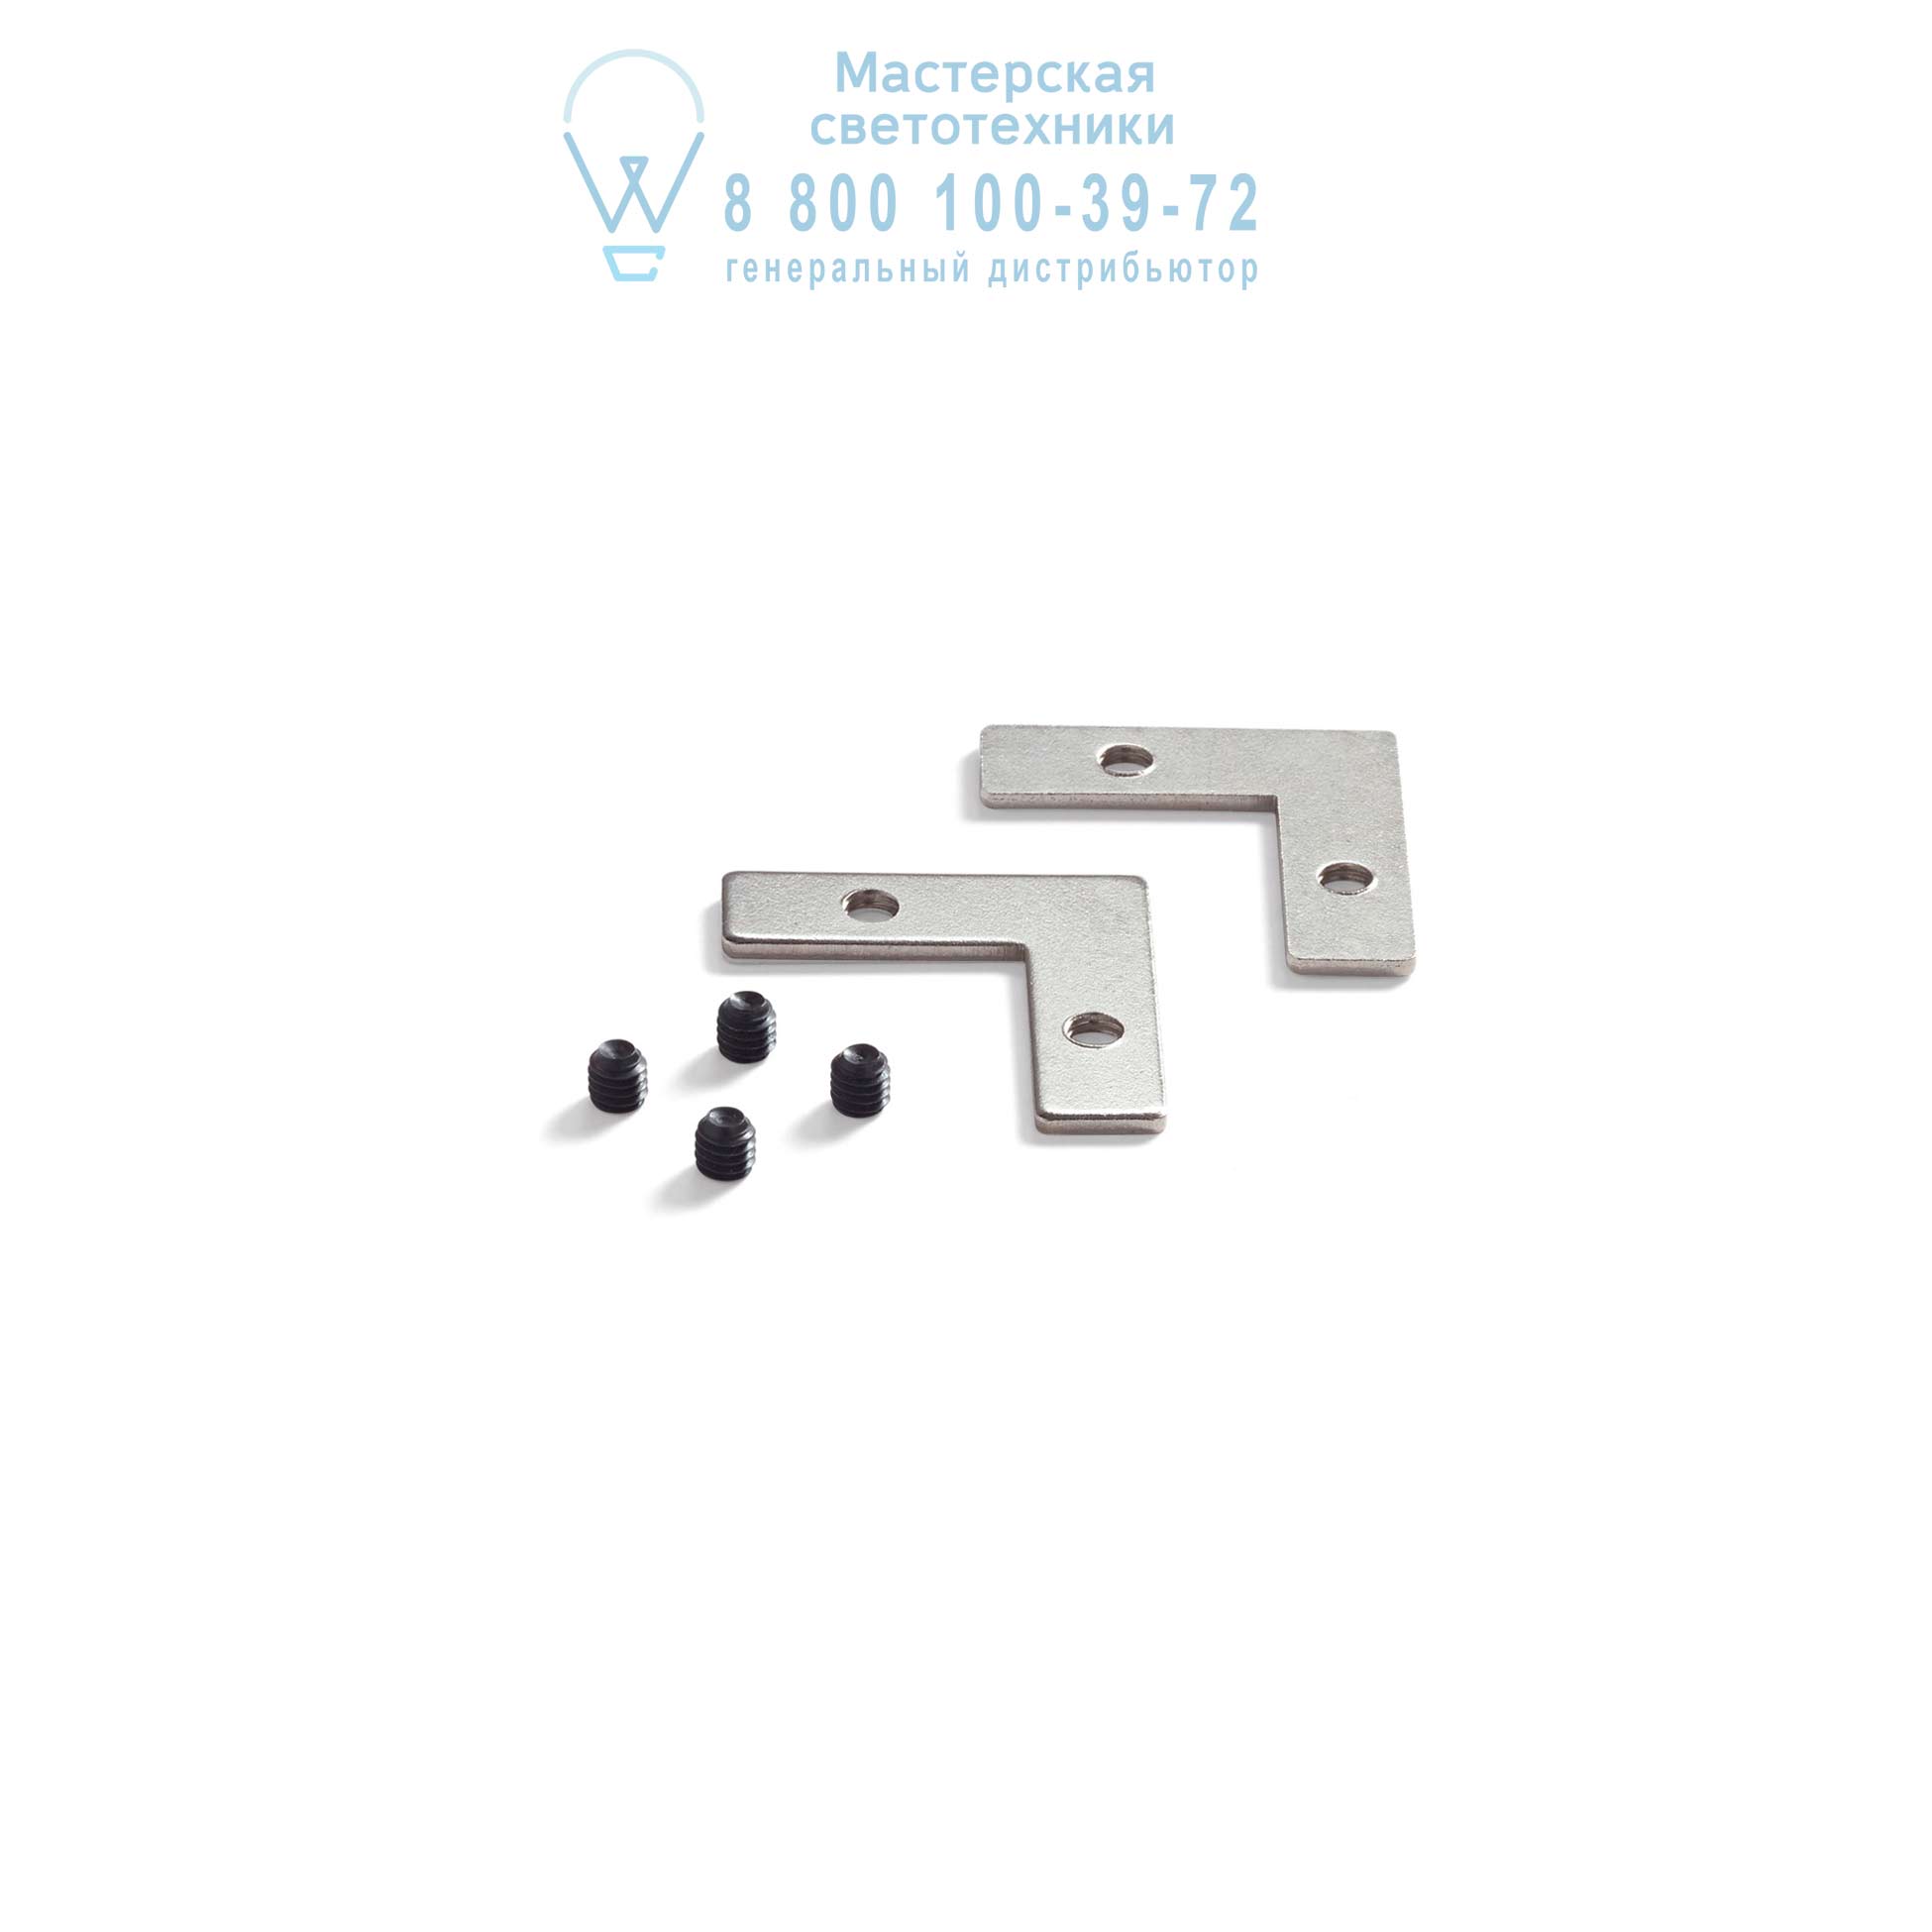 SLOT KIT VERTICALE ORIZZONTALE 